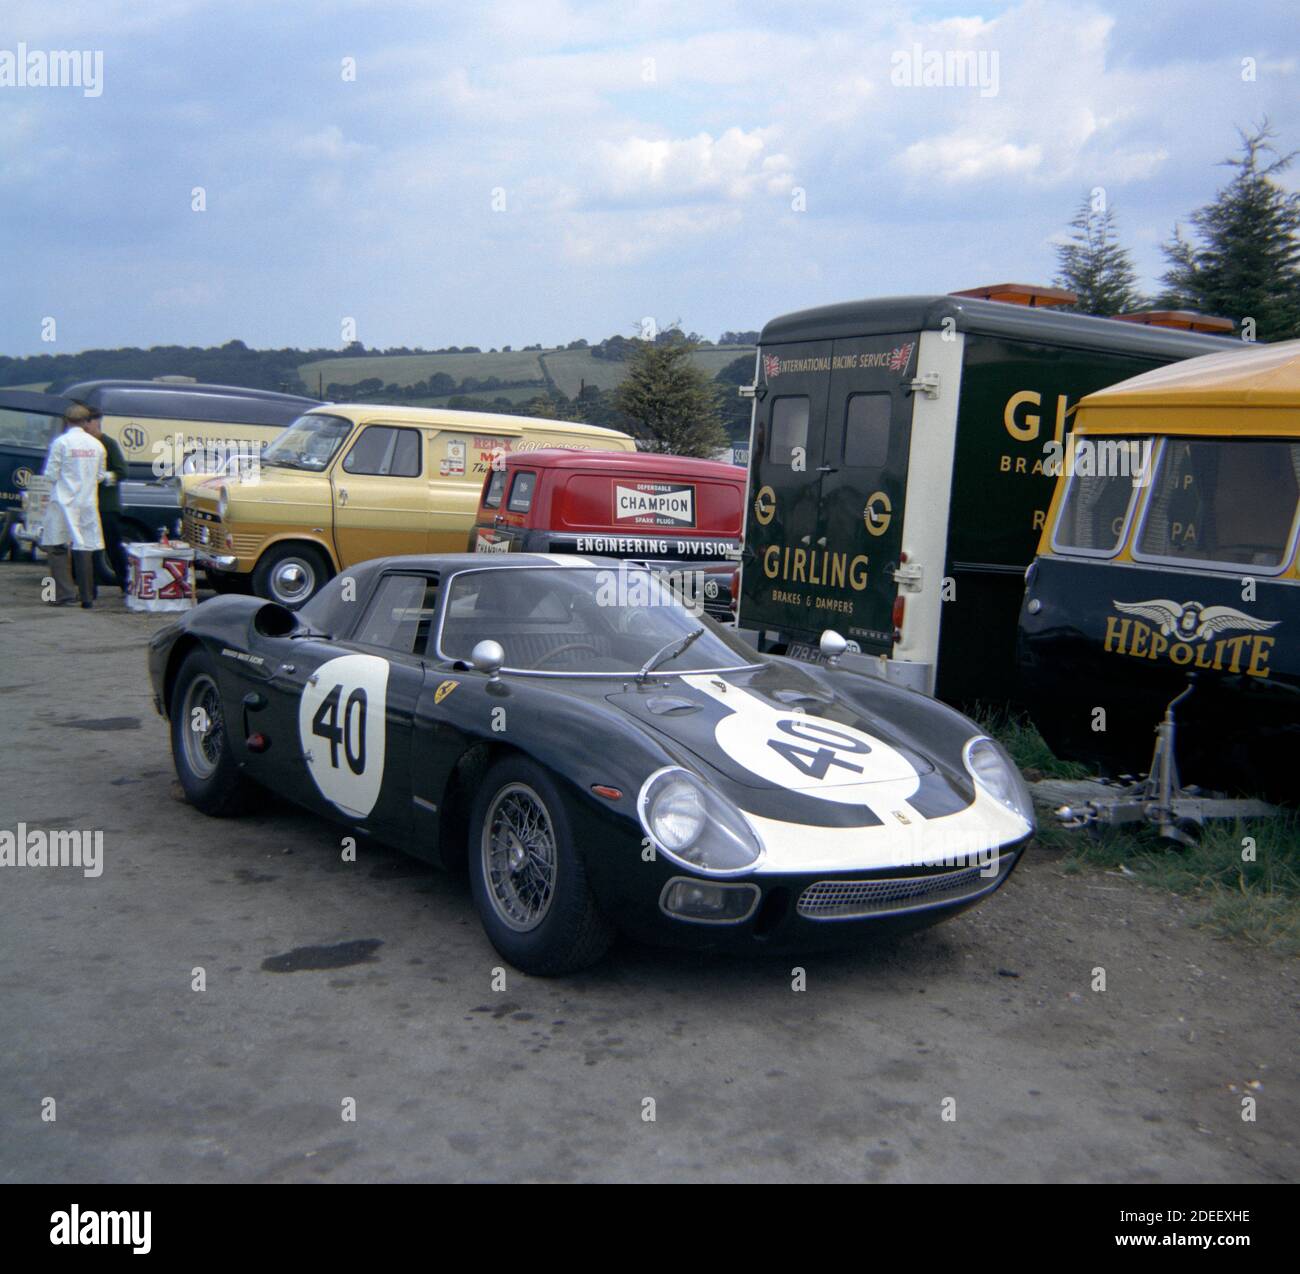 Ferrari 250LM car in paddock at Brands Hatch Practice for the Guards Trophy for sports-racing cars at 1966 British Grand Prix, 15 July. Driver D.Hobbs Stock Photo